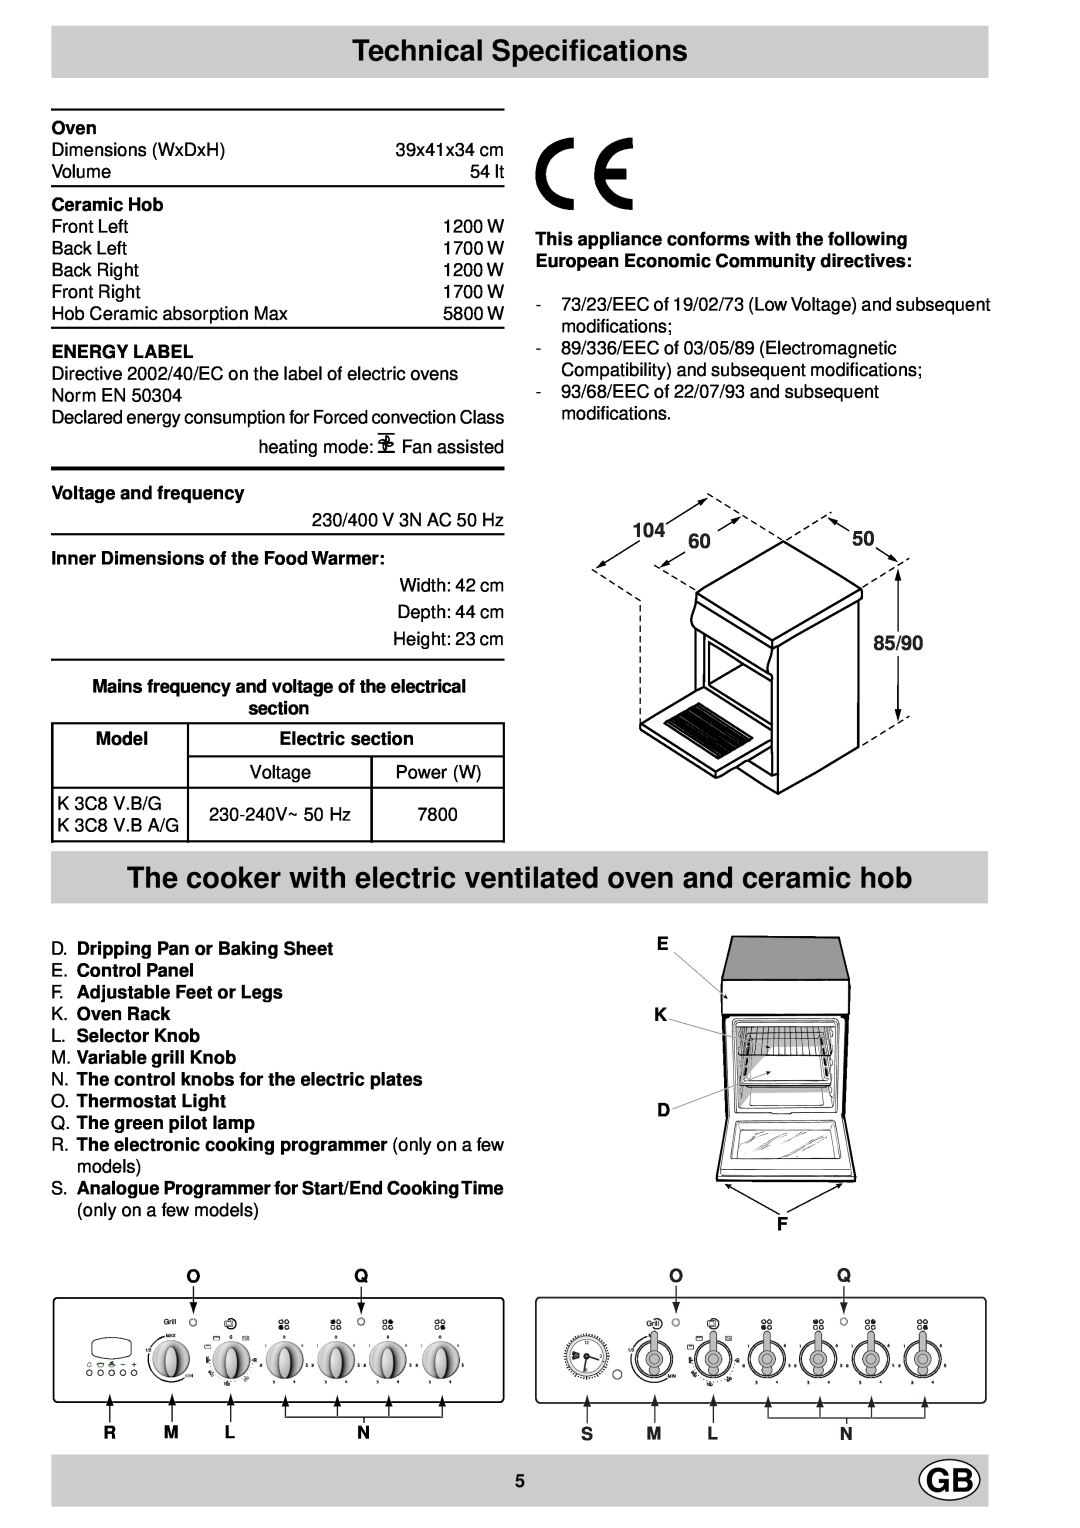 Indesit K 3C8 V.B A/G Technical Specifications, The cooker with electric ventilated oven and ceramic hob, Oven, Model 